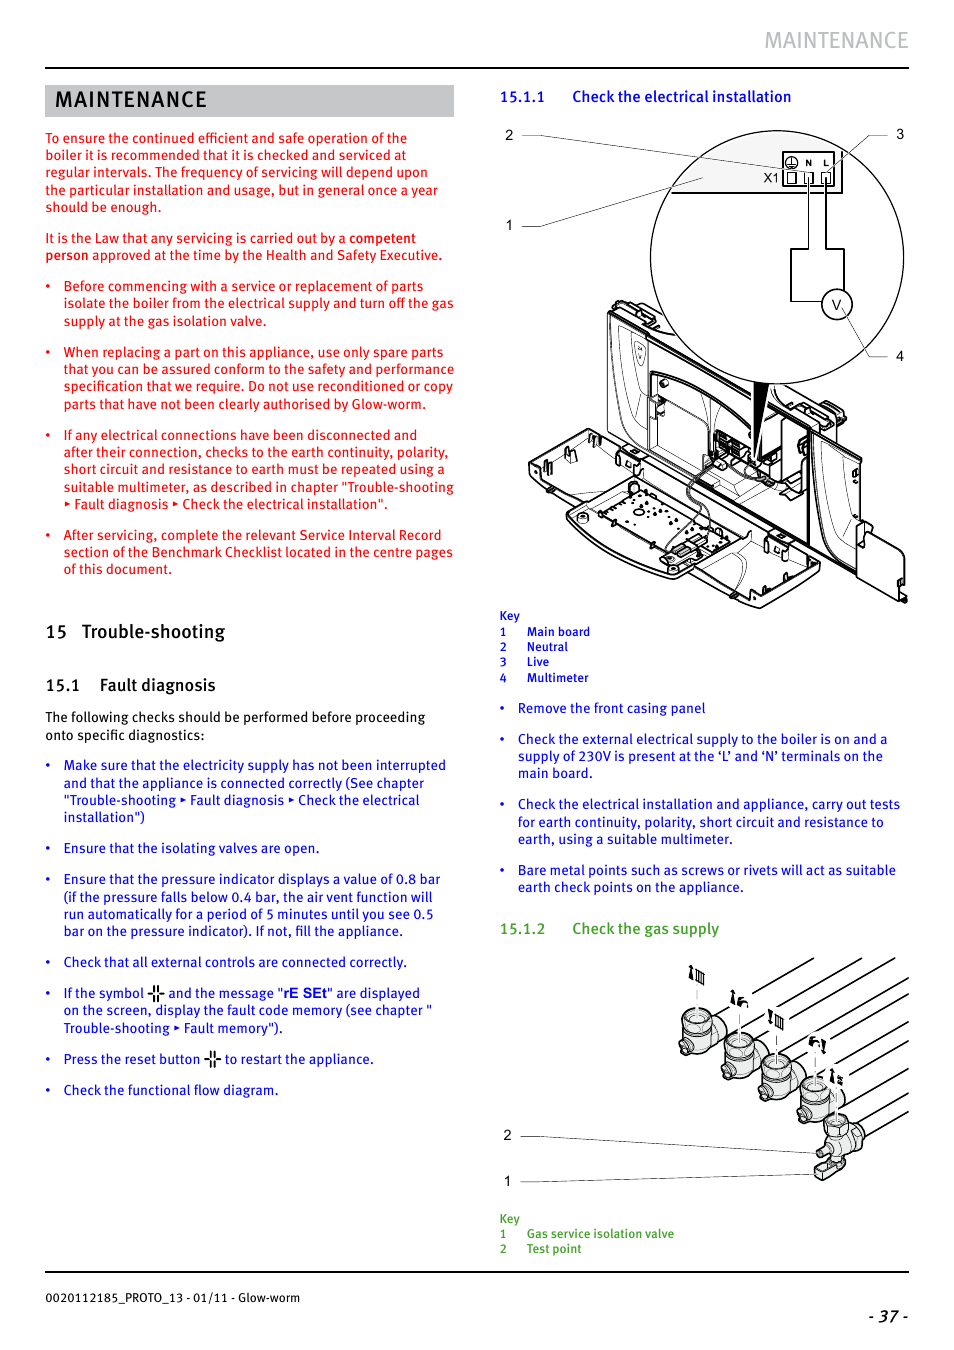 Maintenance, 15 trouble-shooting | Glow-worm Ultracom2 35 Store User Manual | Page 39 / 68